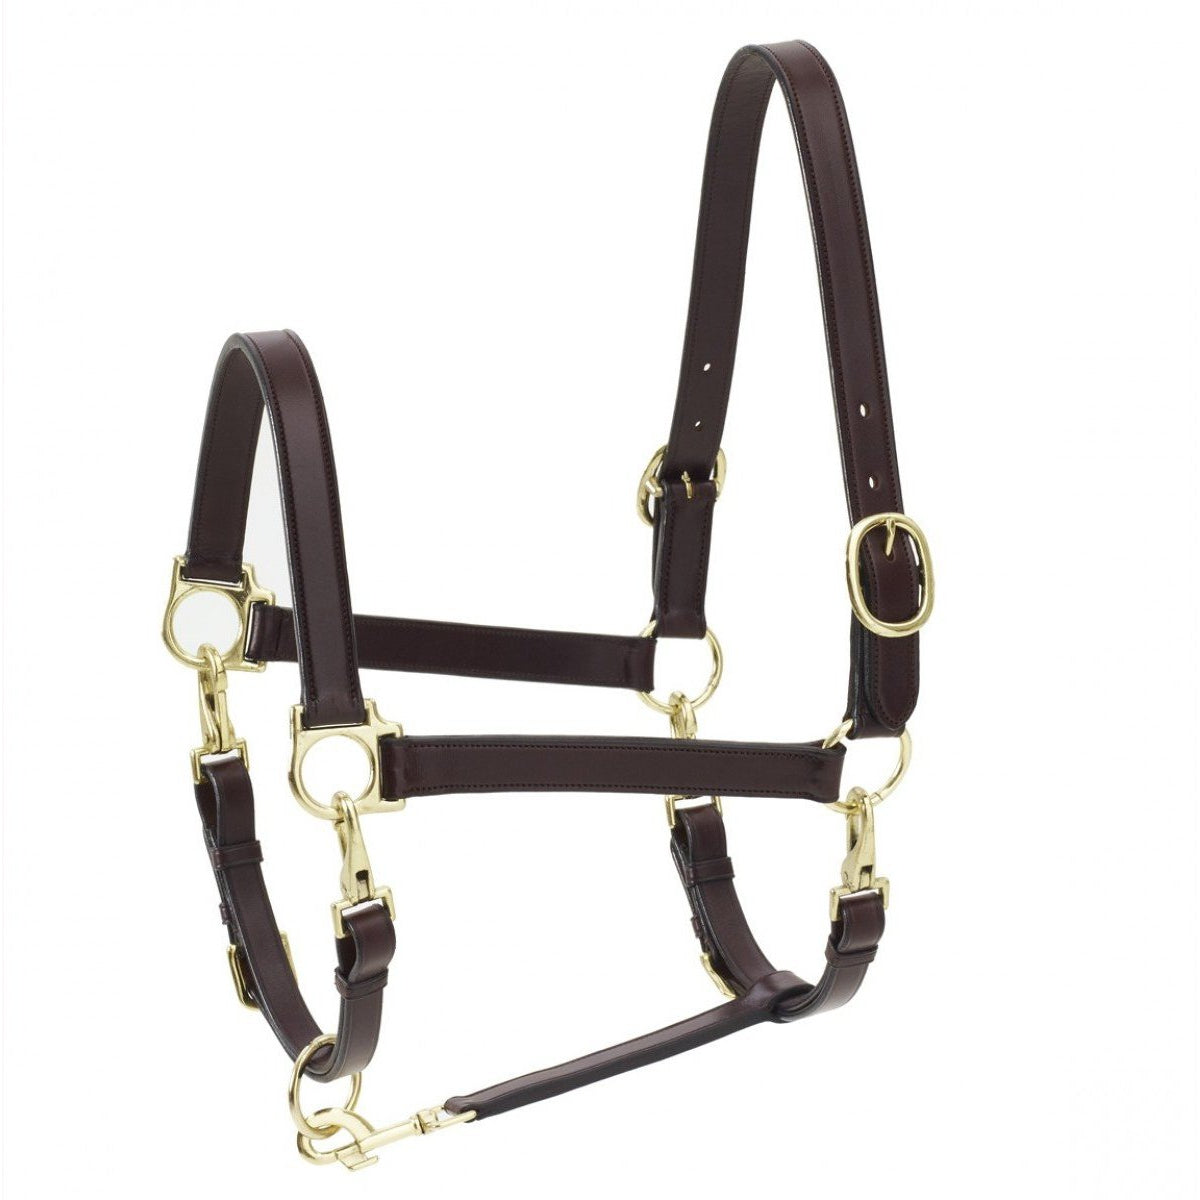 Ovation 4-Way Leather Grooming Halter - West 20 Saddle Co.